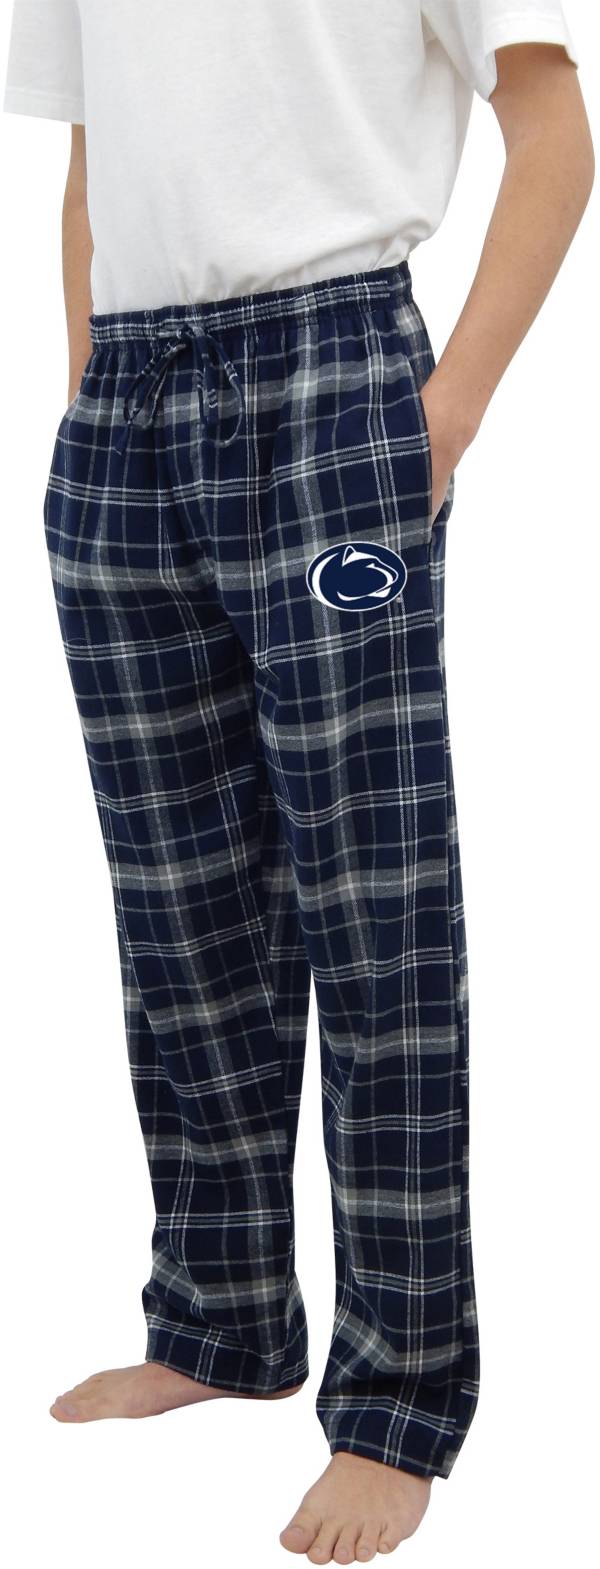 Concepts Sport Men's Penn State Nittany Lions Blue Ultimate Embroidered Sleep Pants product image